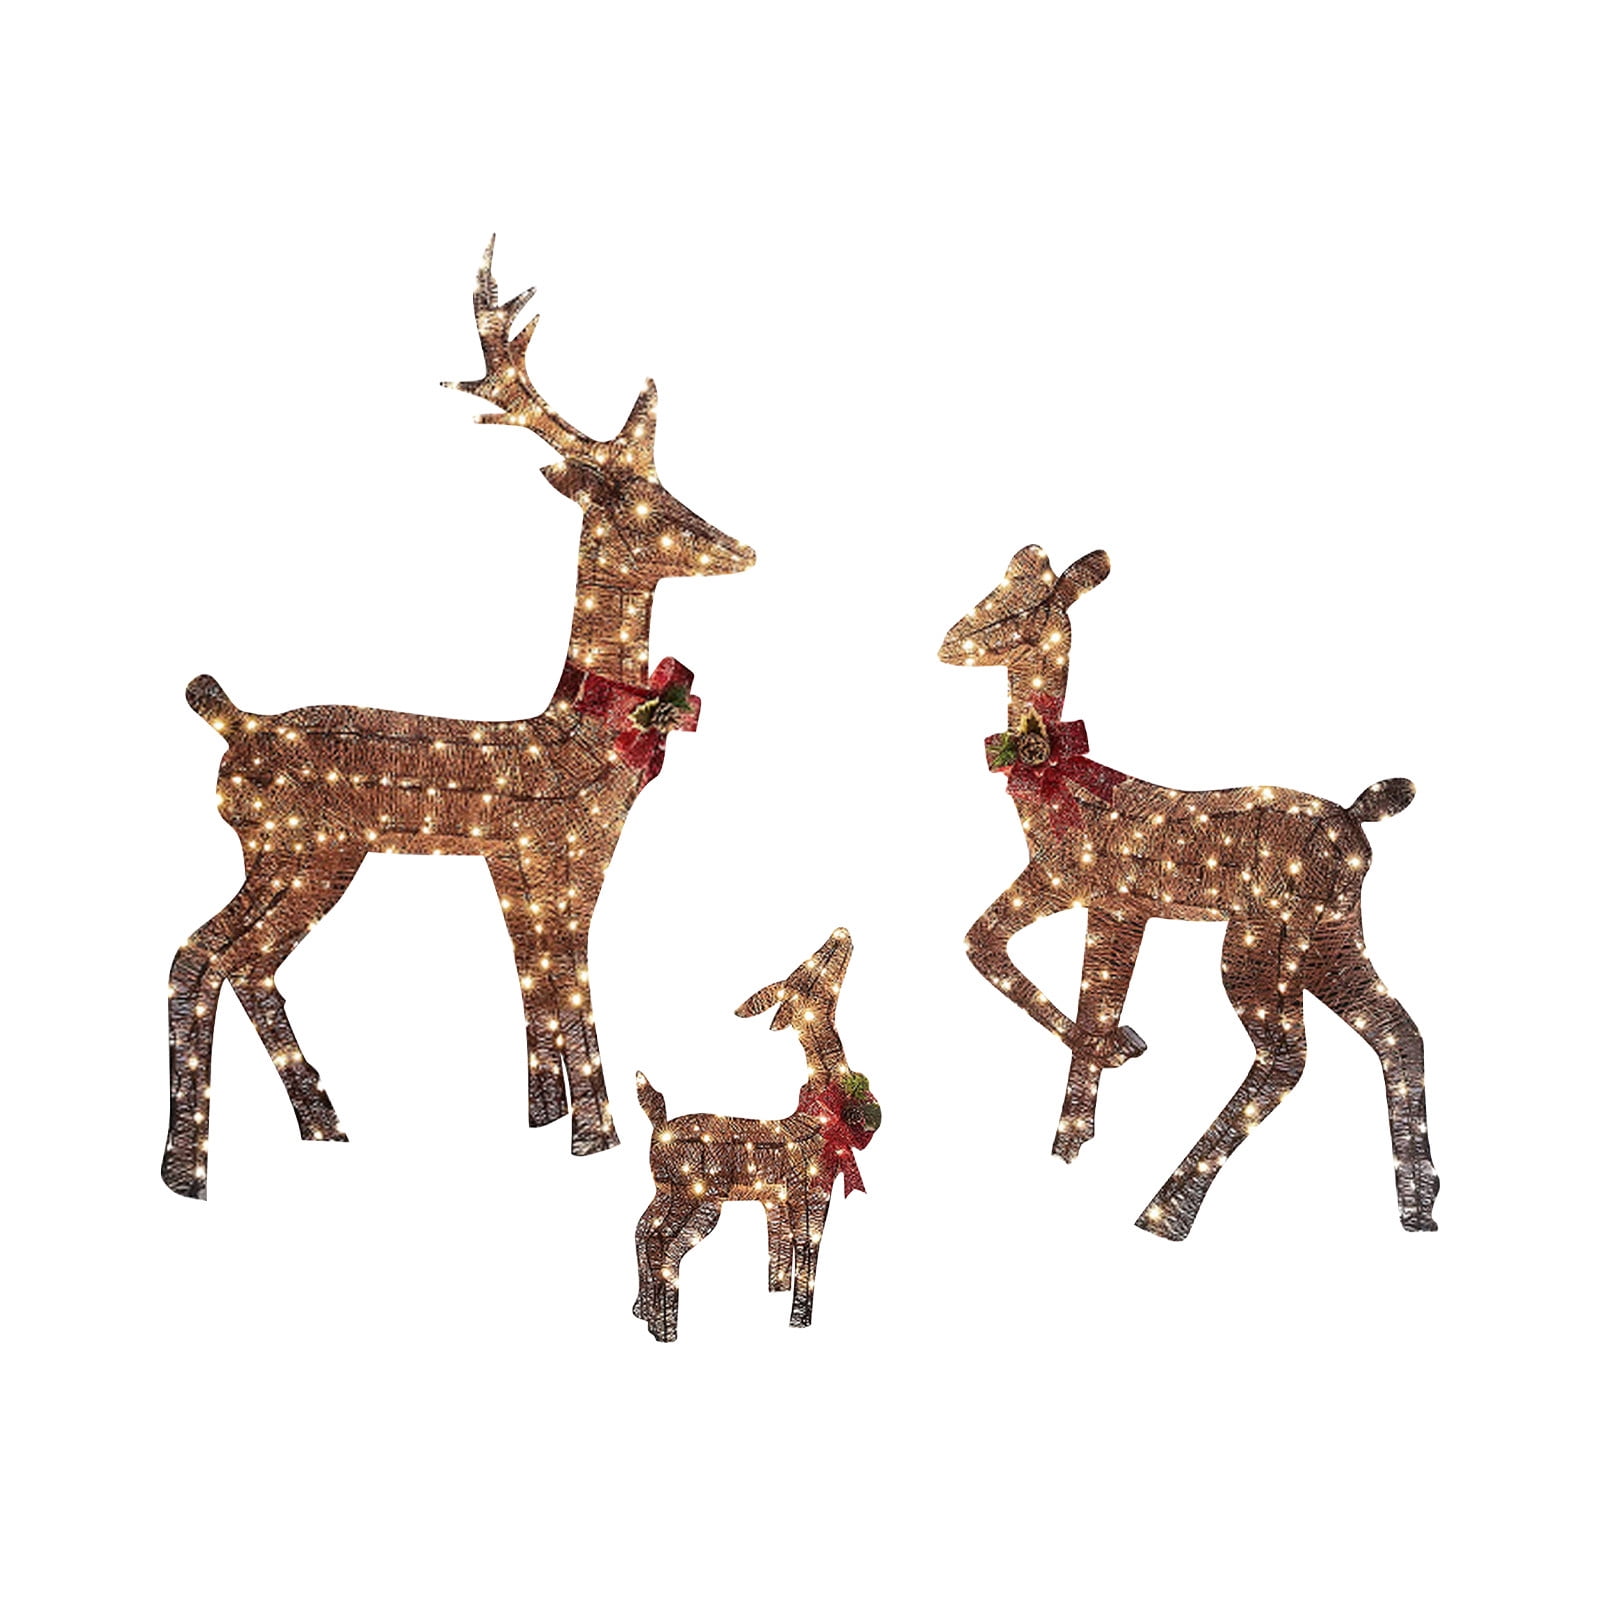 RKSTN 3-Piece Christmas Reindeer Family Reindeer Christmas Decoration  Lighted Reindeer for Home Lawn Yard Garden Indoor Outdoor Decor, Christmas  Decorations on Clearance 